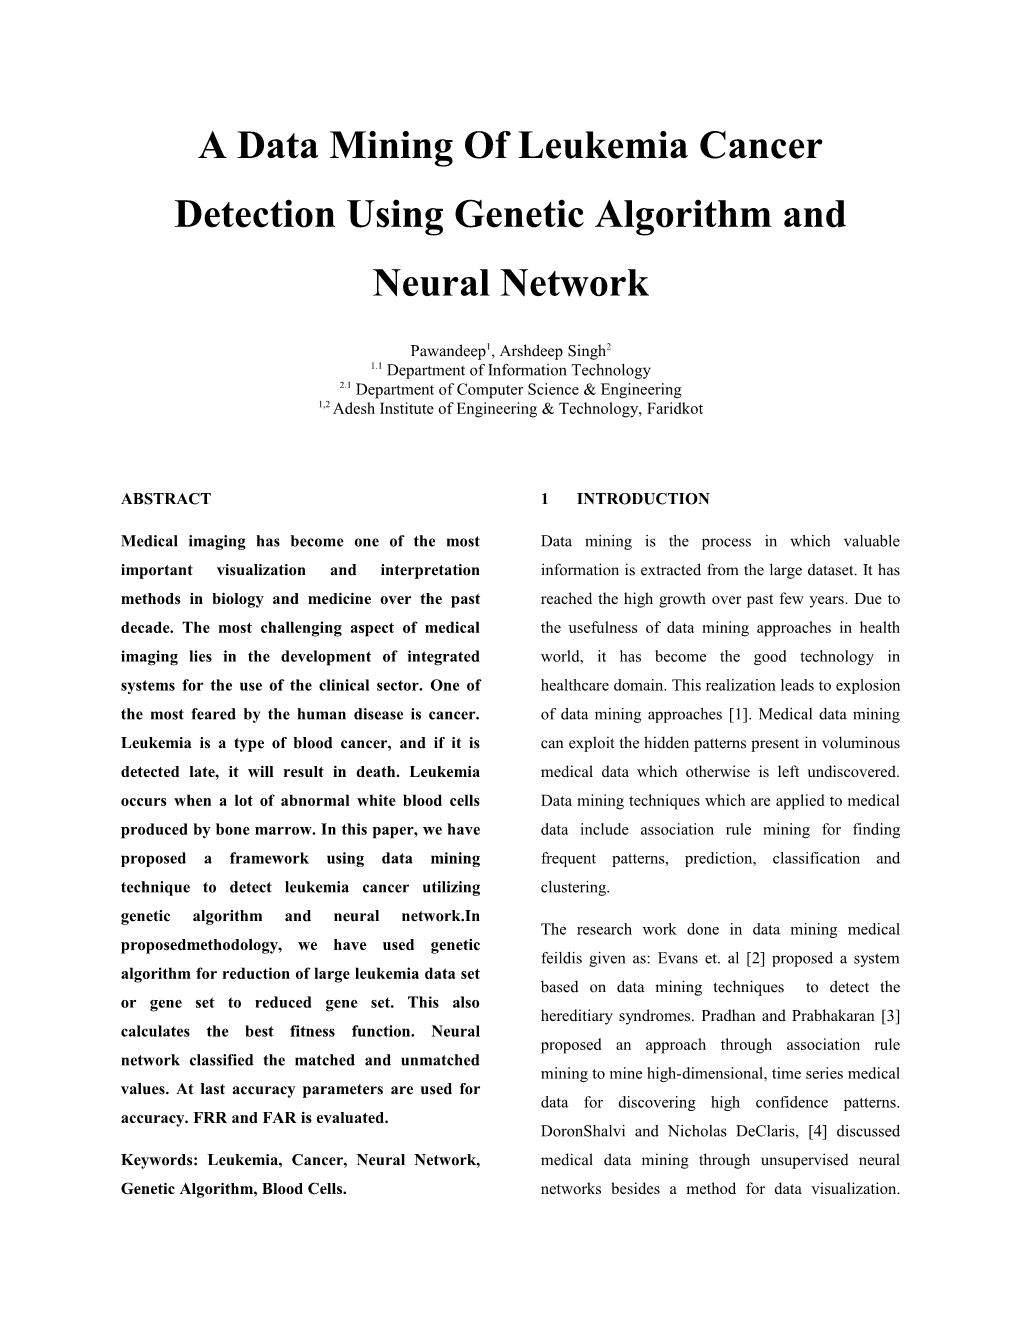 A Data Mining of Leukemia Cancer Detection Using Genetic Algorithm and Neural Network